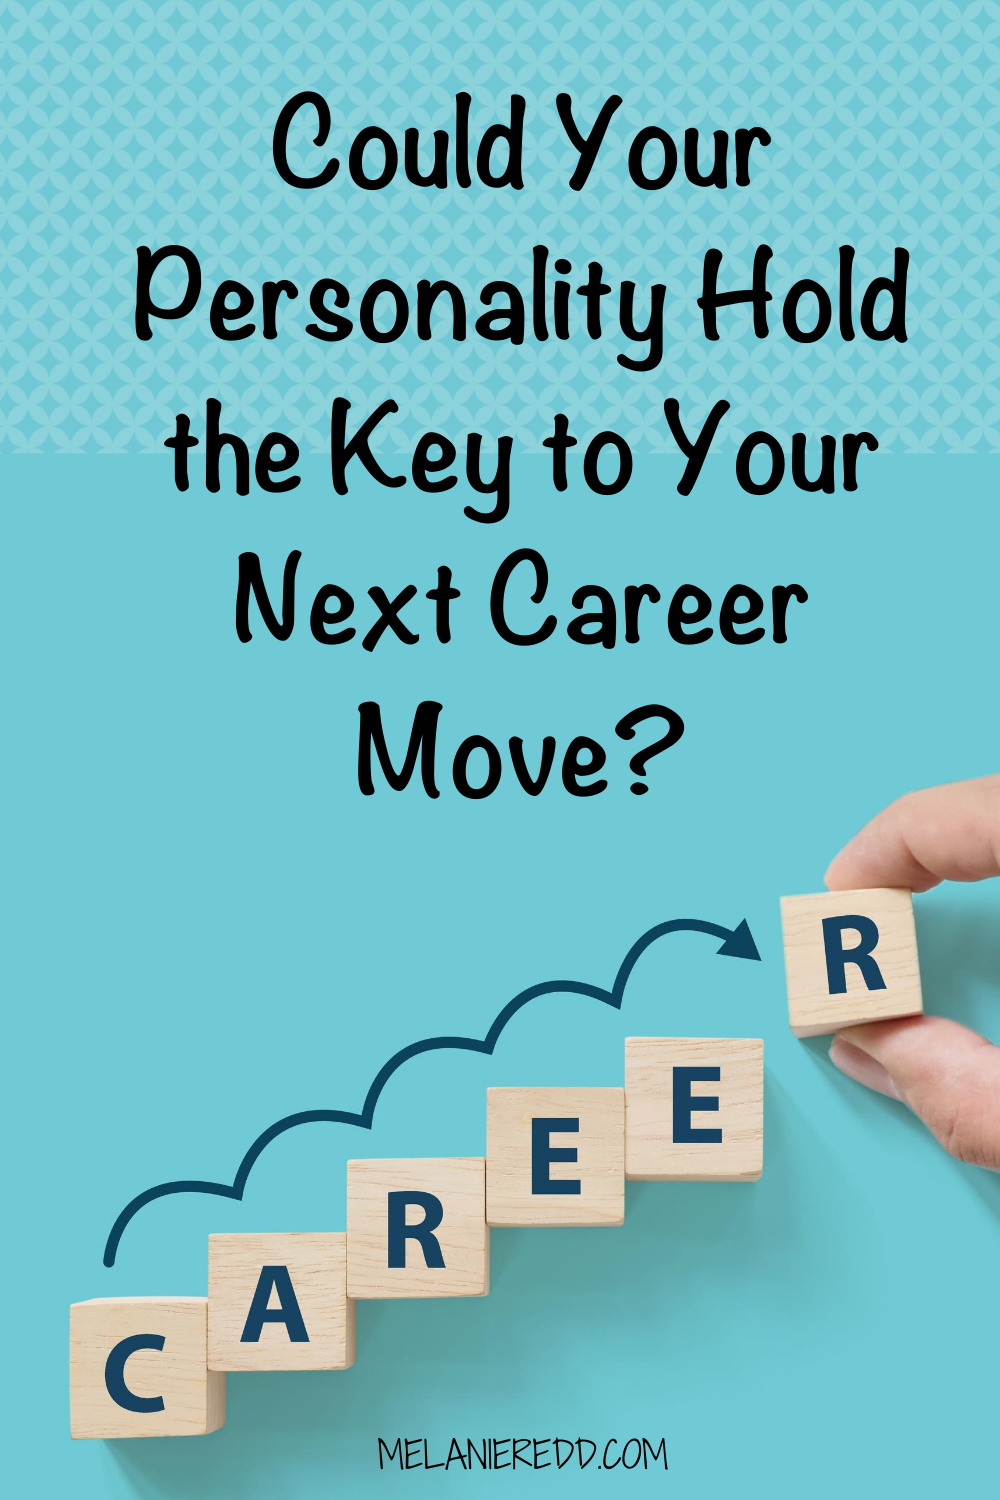 There are times when we are ready for a career move. Something new. Could Your Personality Hold the Key to Your Next Career Move?